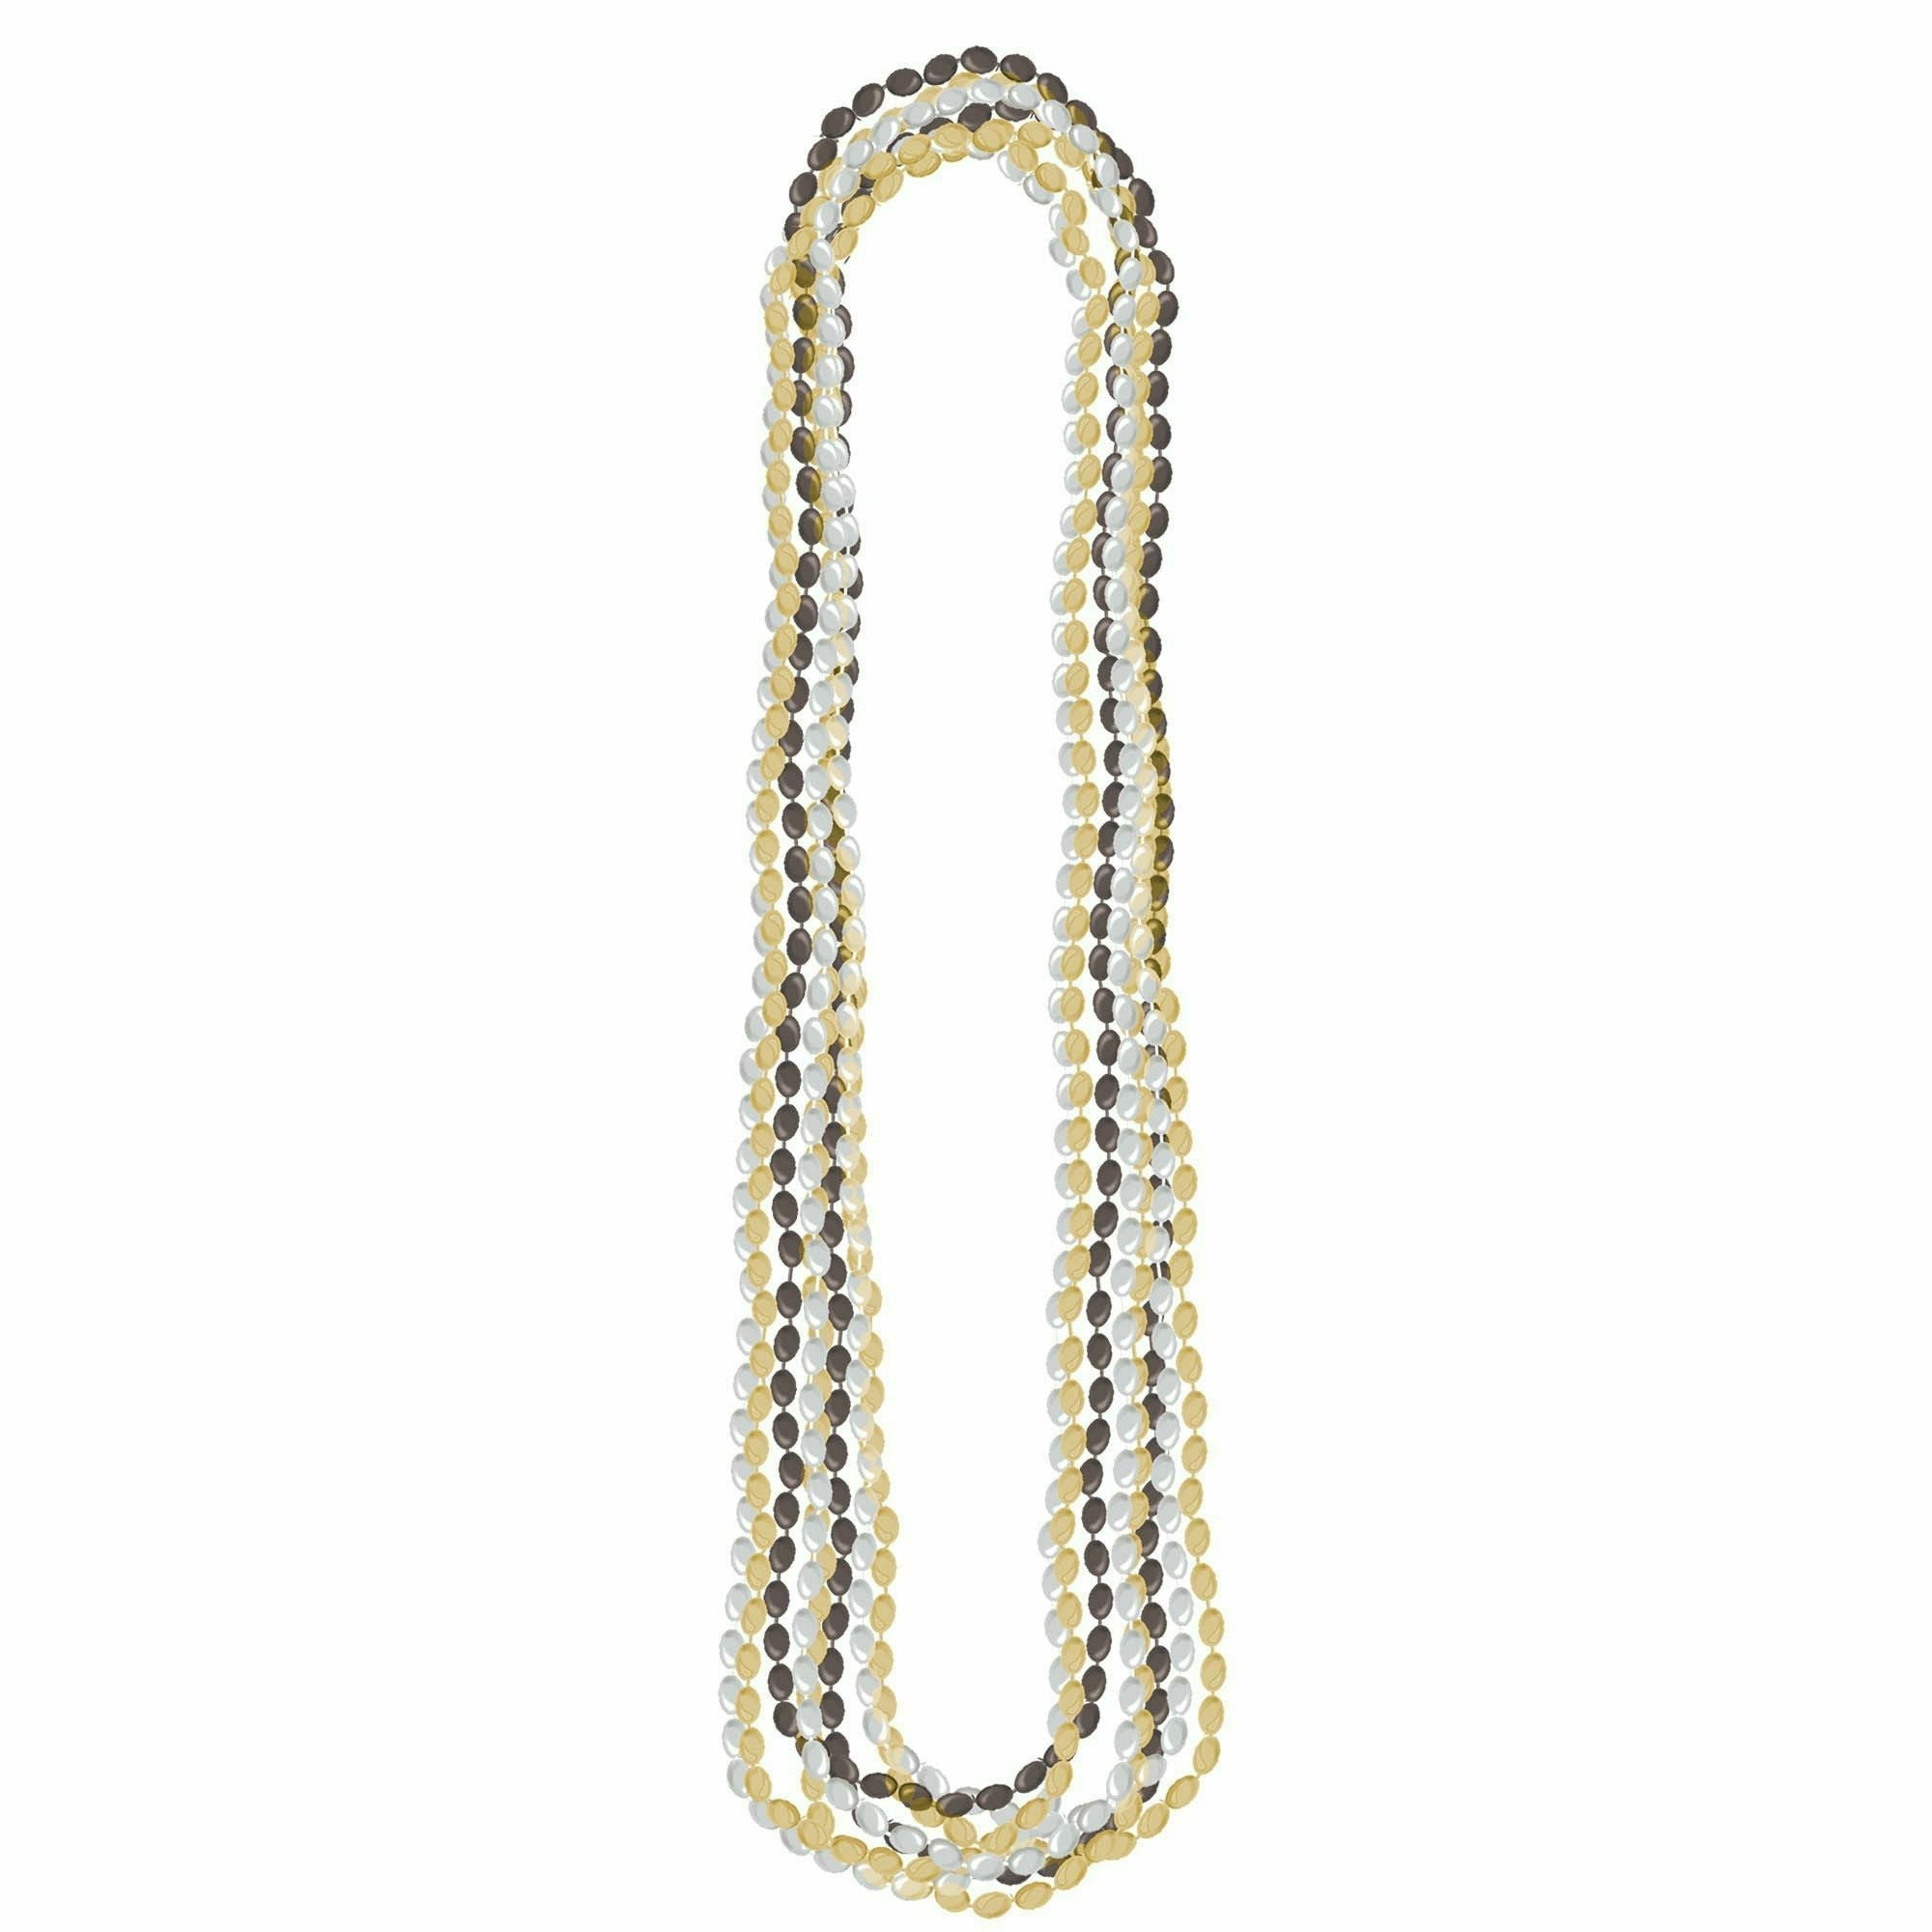 Amscan COSTUMES: ACCESSORIES Metallic Bead Necklaces-Black, Silver & Gold